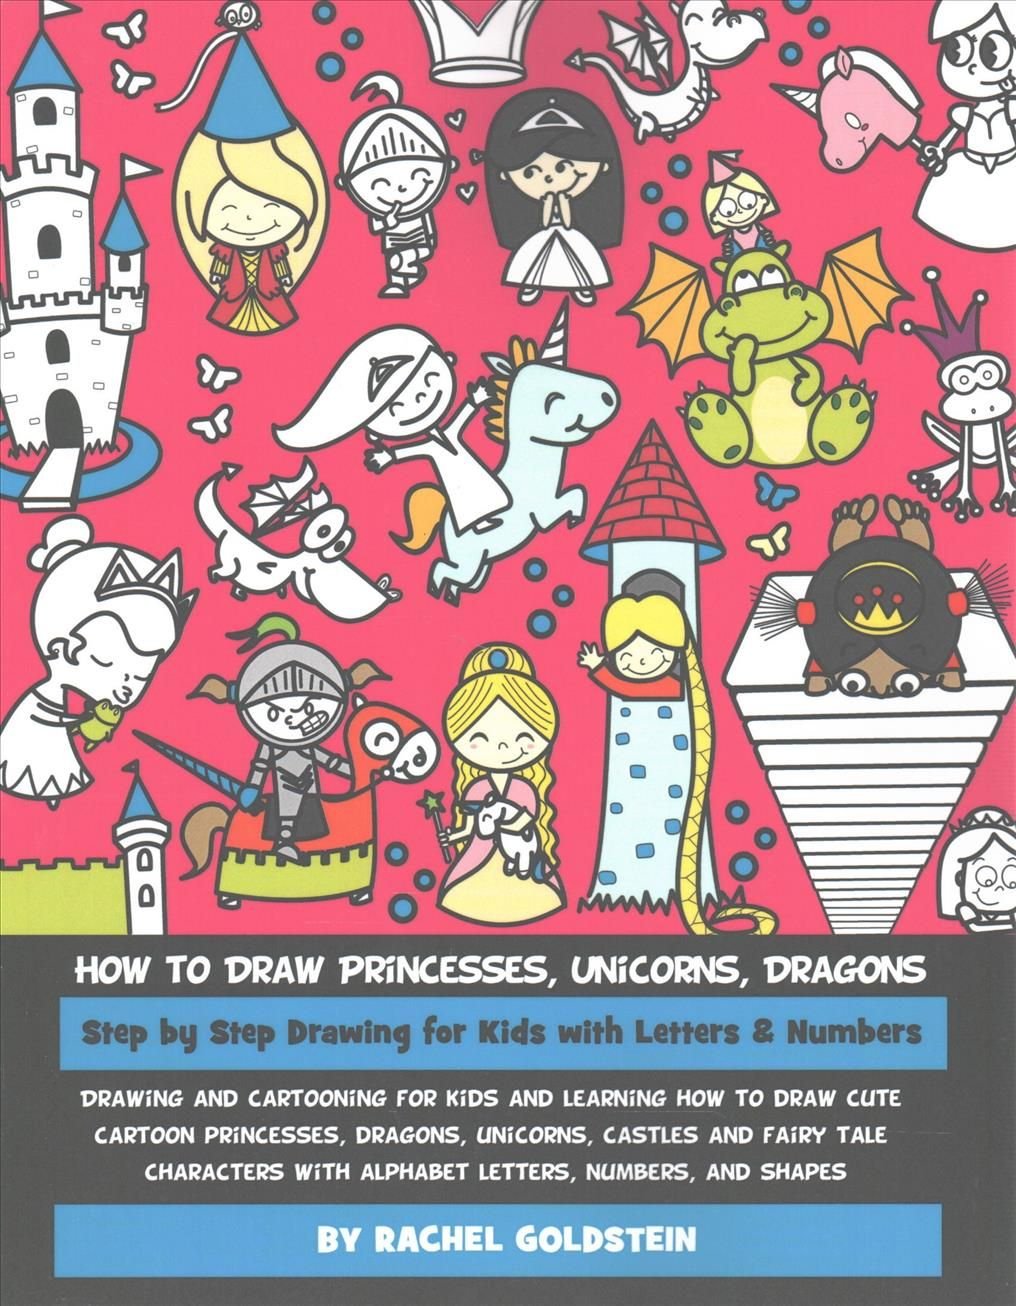 Free Printable Princess Coloring Pages for Kids